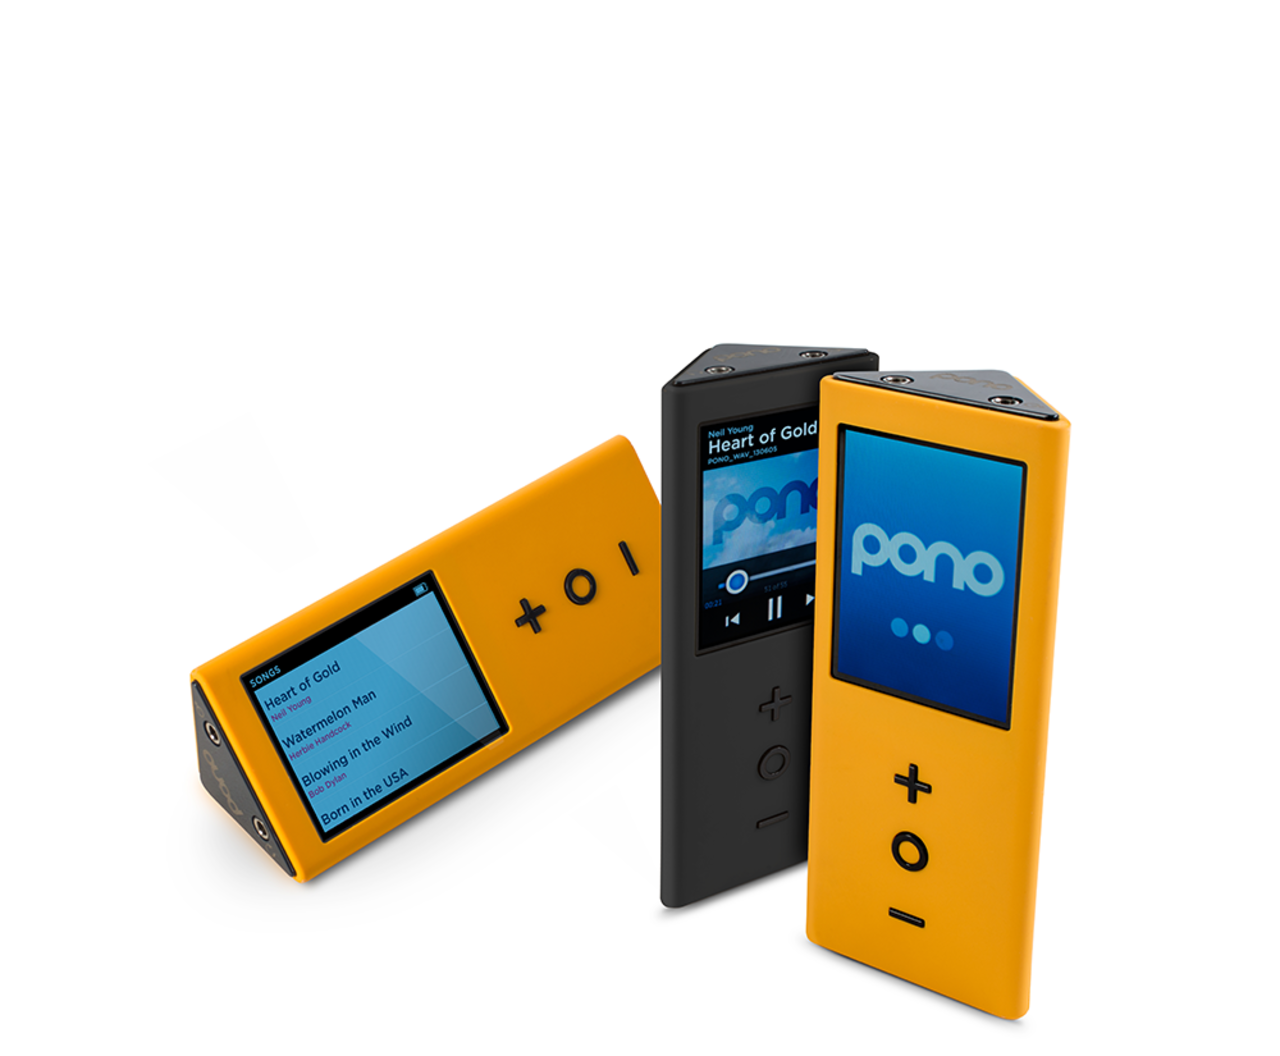 <strong>Pono Music: $6.2 million pledged of $800,000 goal, 18,220 backers -- </strong>Neil Young just couldn't stand listening to music on his MP3 player, so he decided to create his own device. The rock icon's Pono Music player promises high-quality, non-compressed sound. It will stream songs in 24-bit, 192-kHz sound and will come with 128GB of storage.